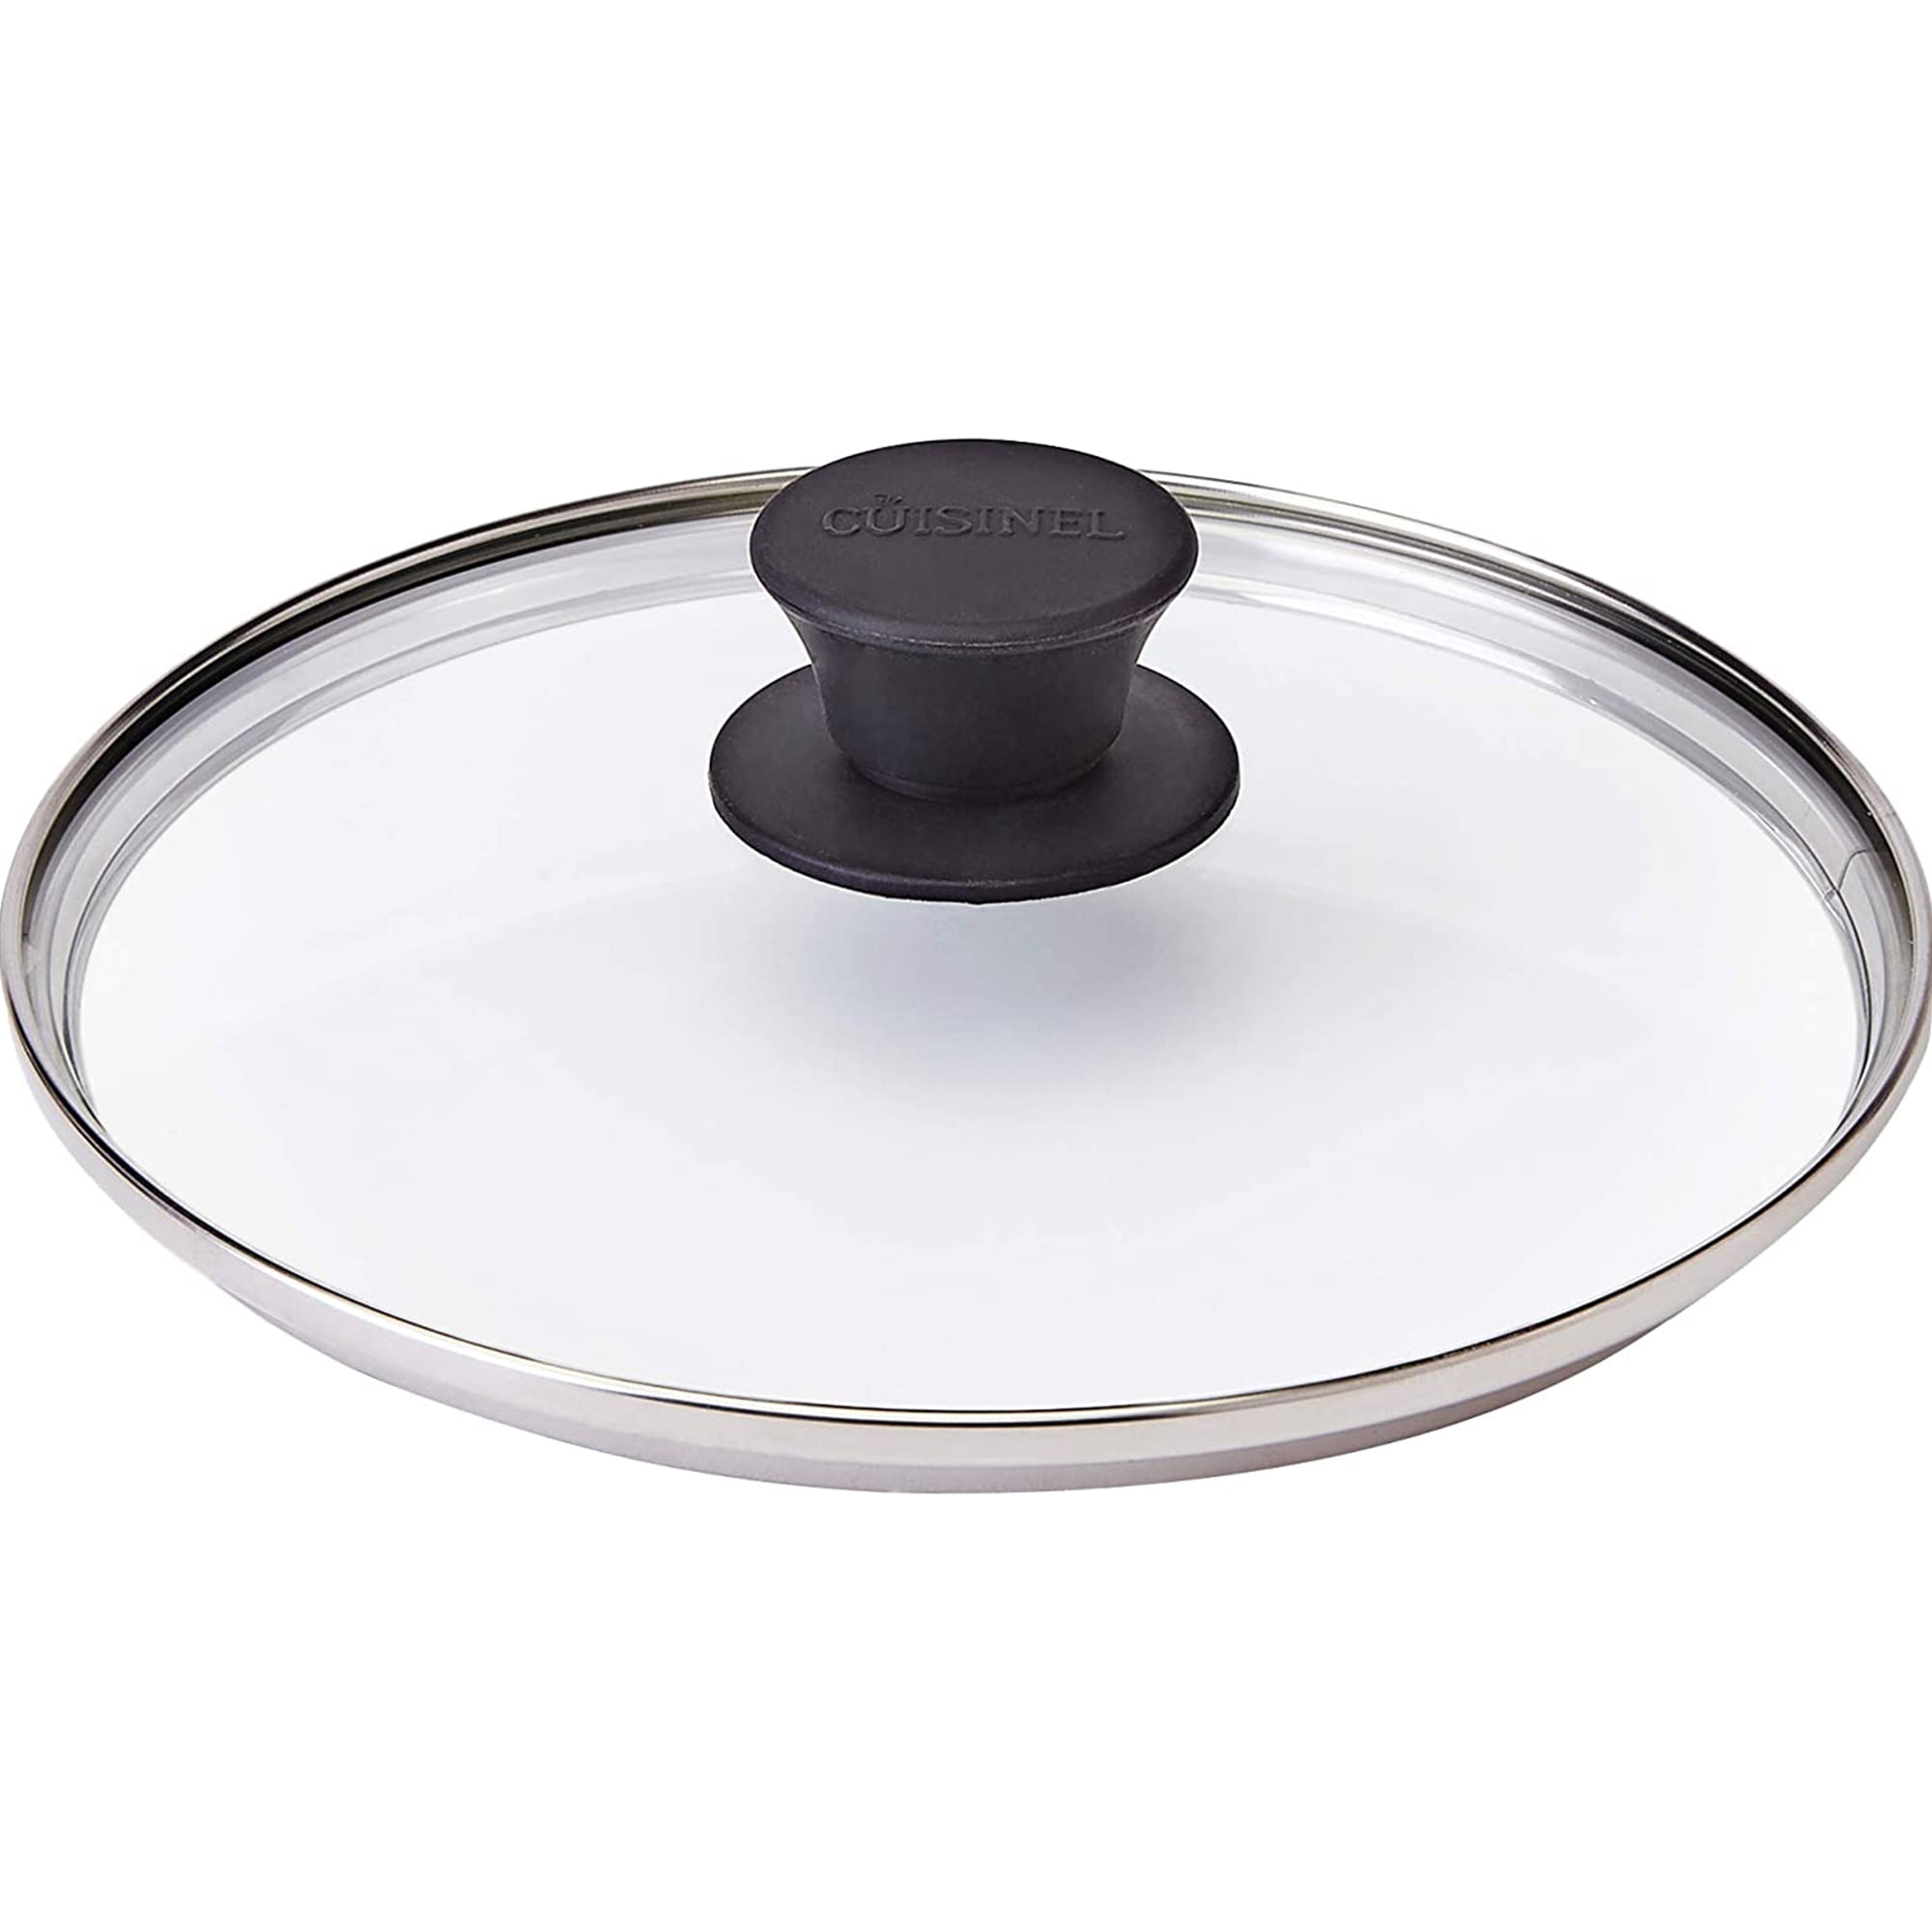 Wadaza Pan Lid 9.5 Inch - Tempered Glass Pot Lid - Oven Safe Replacement  Glass Lid for Frying Pan Wok Pot Skillet